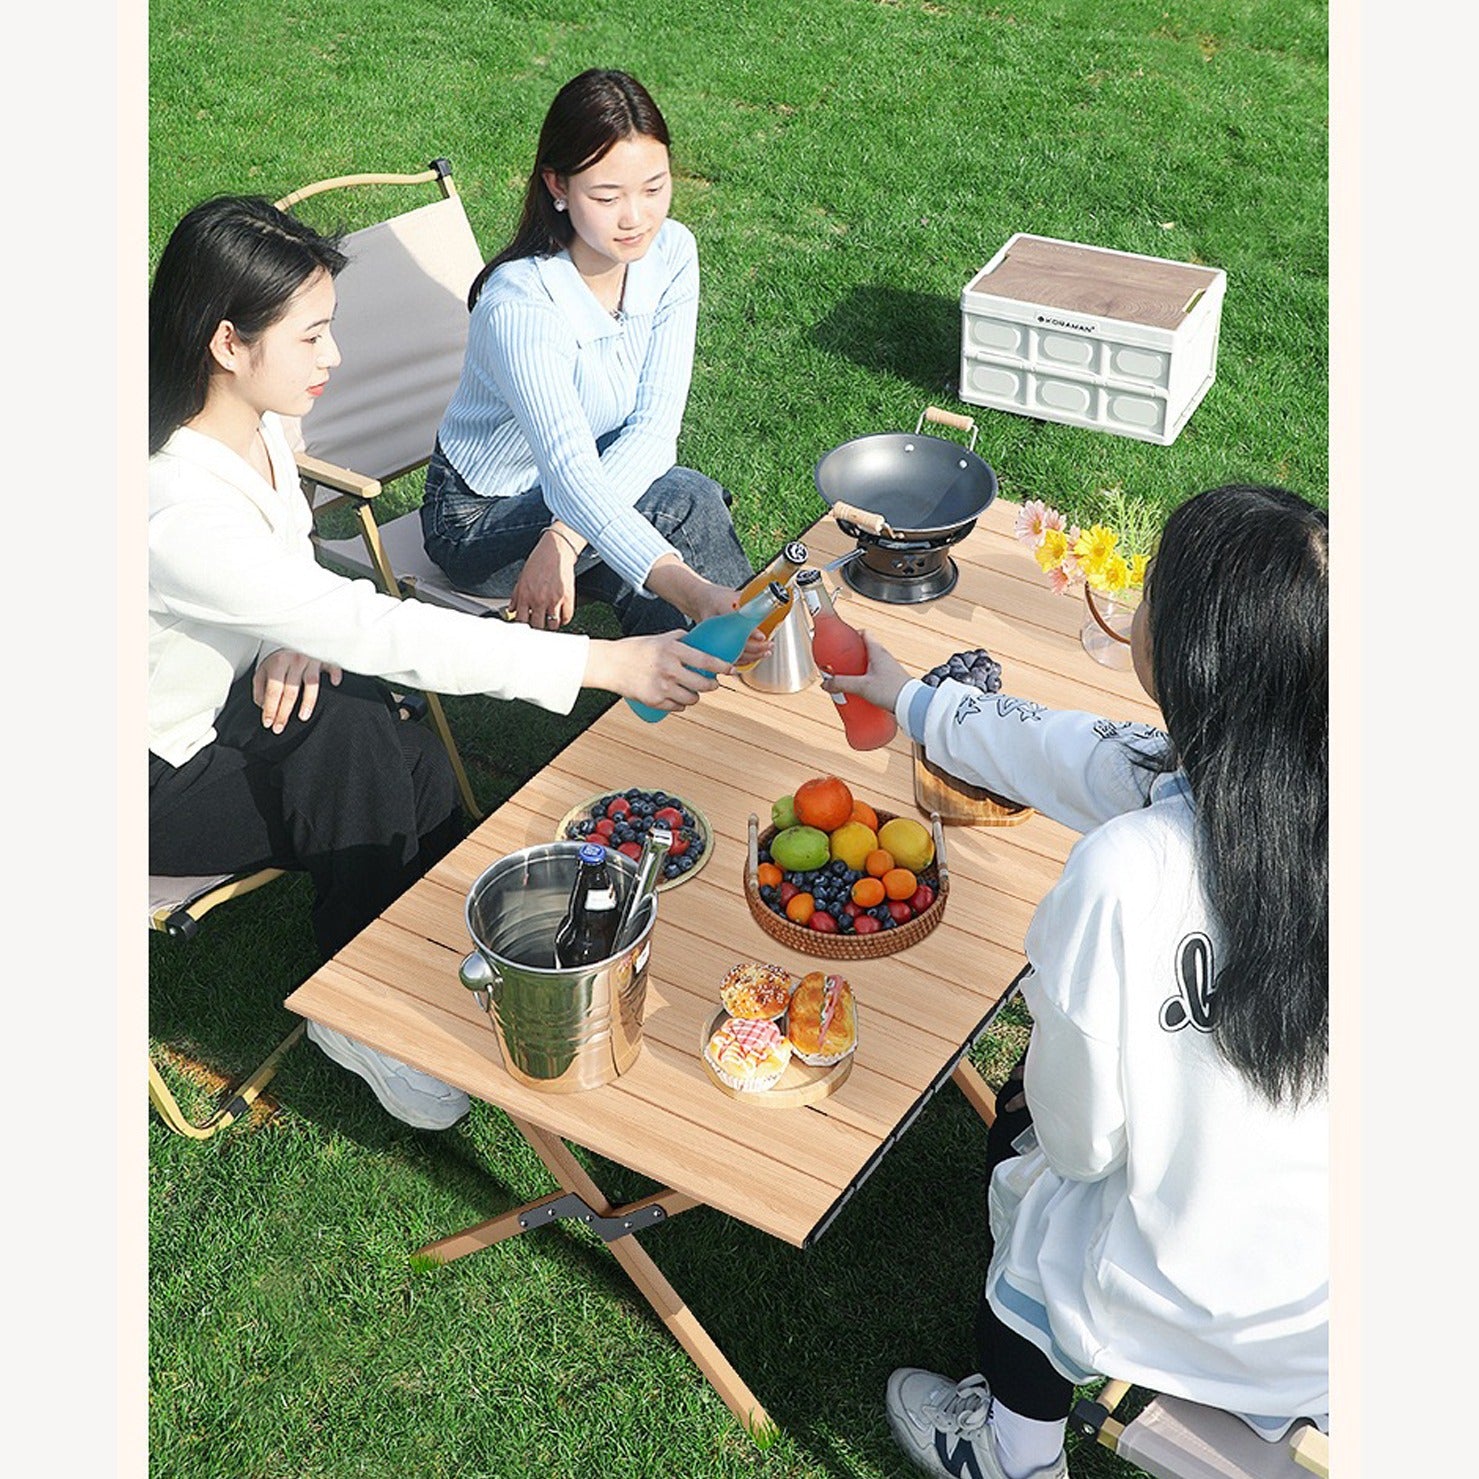 Three girls chilling on Portable Folding Chairs and Table, surrounded by fresh fruits and burgers.